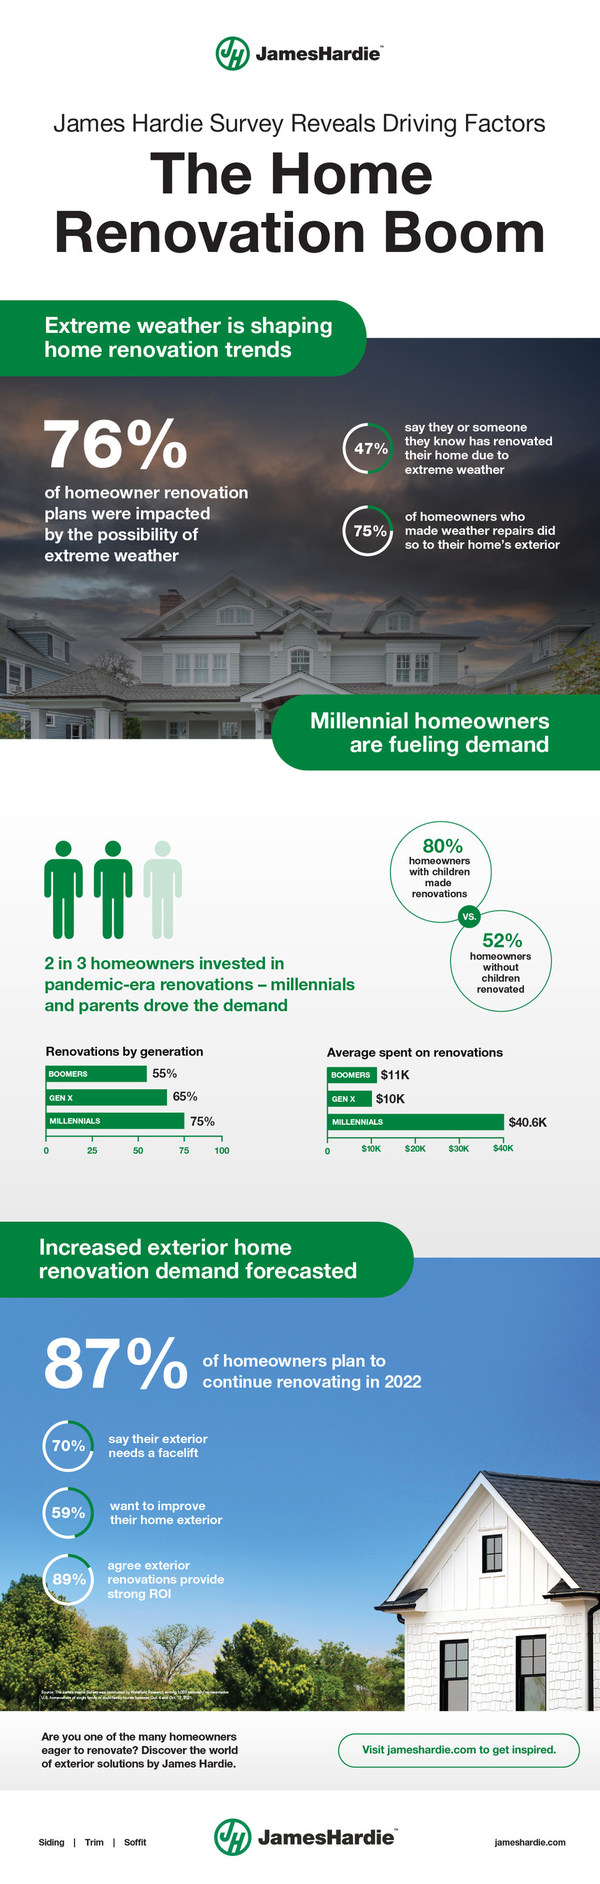 Survey by James Hardie reveals driving factors in the home renovation boom.